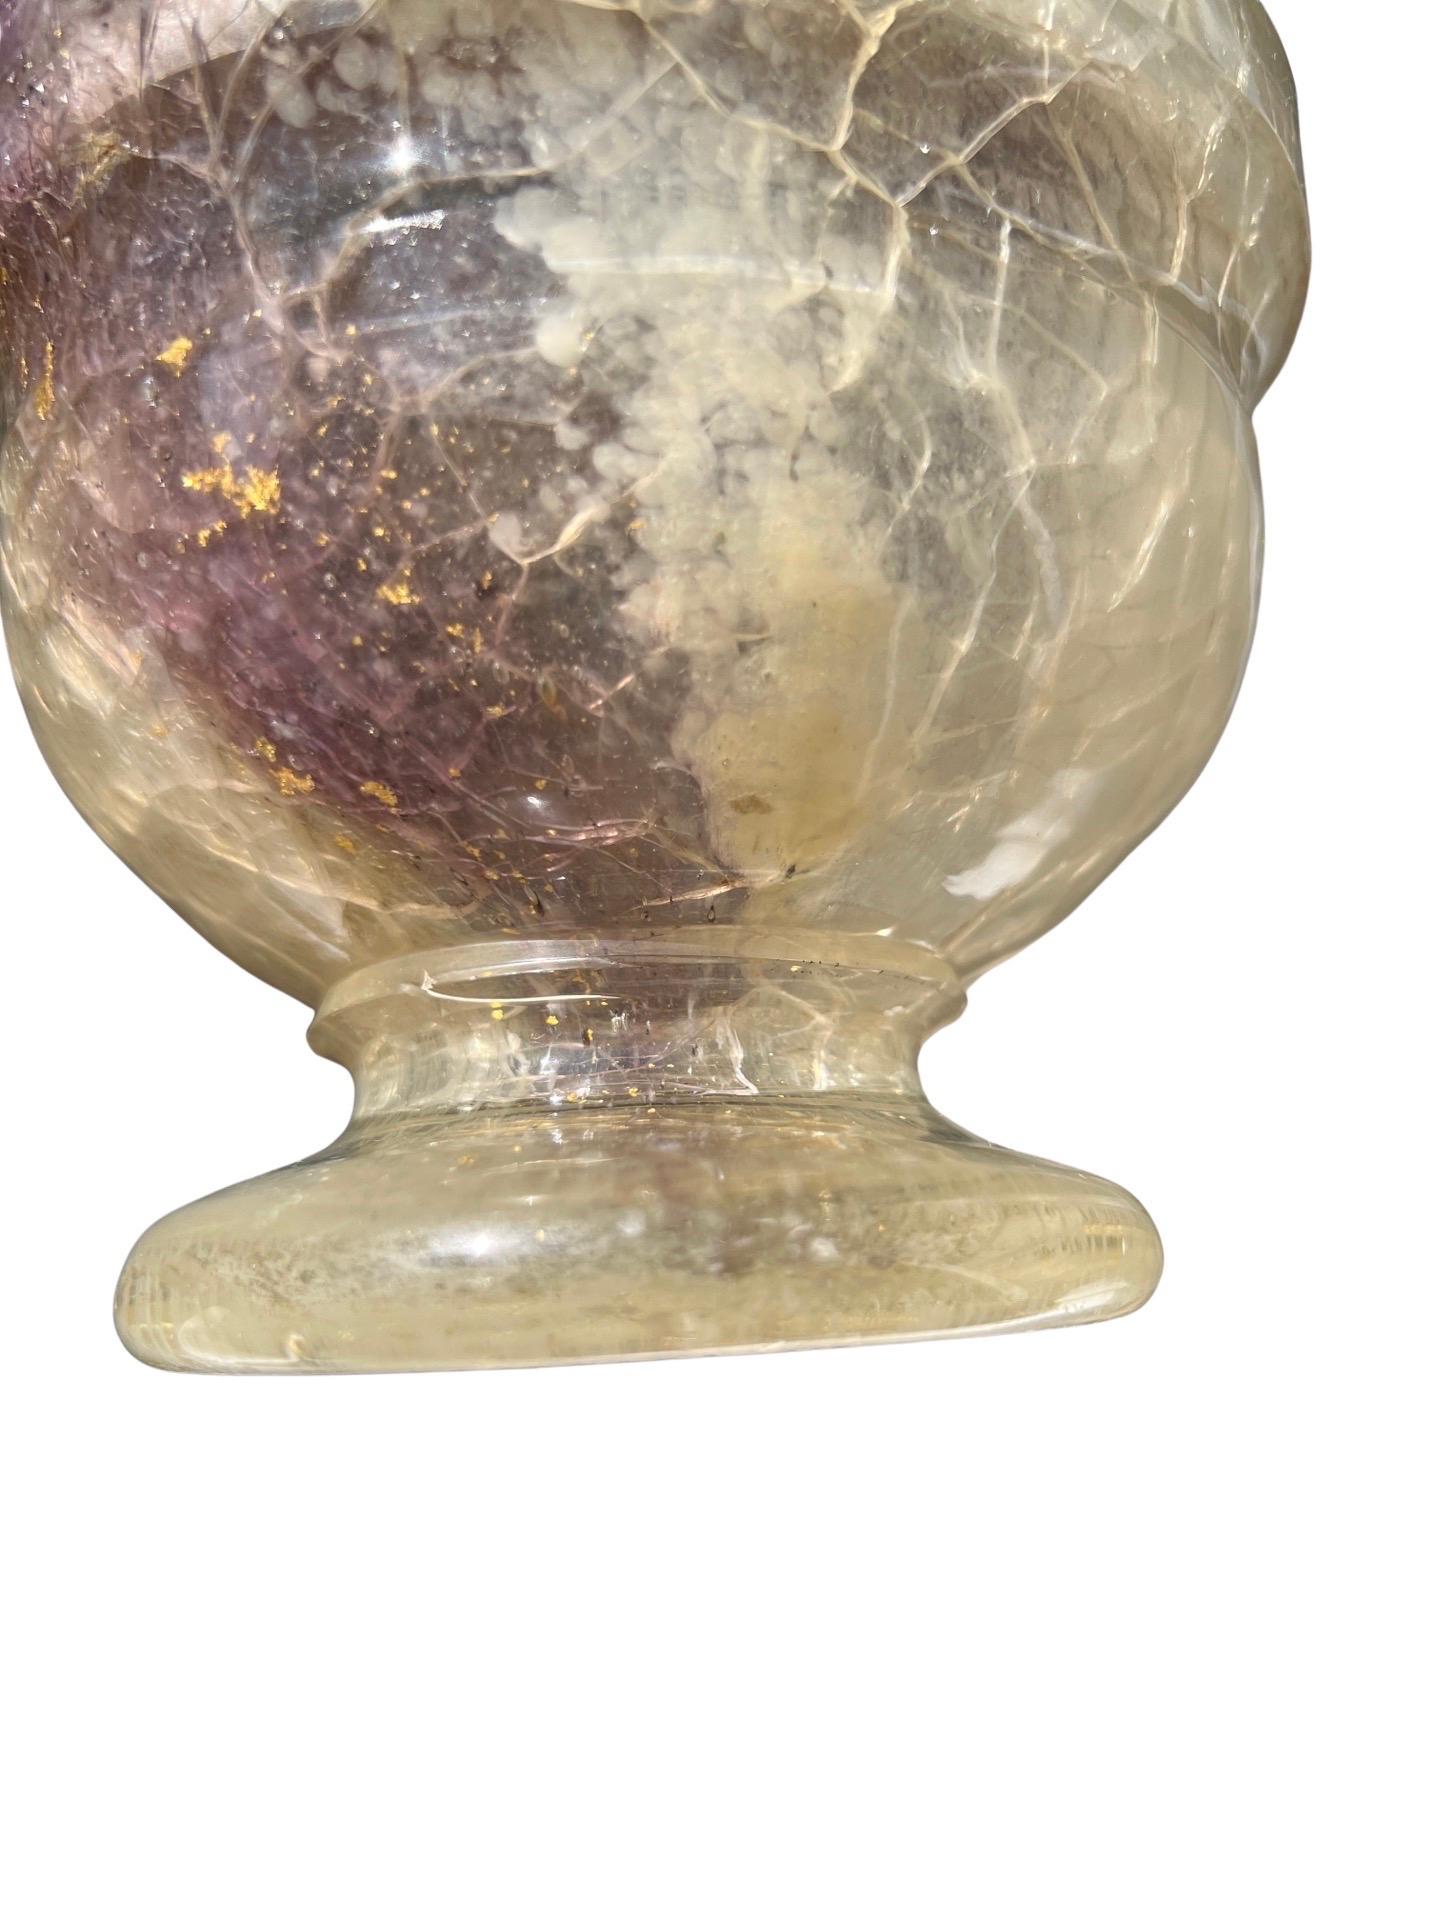 After The Roman Antique - Rock Crystal, Glass & Gold Flecking Grand Tour Pitcher For Sale 7